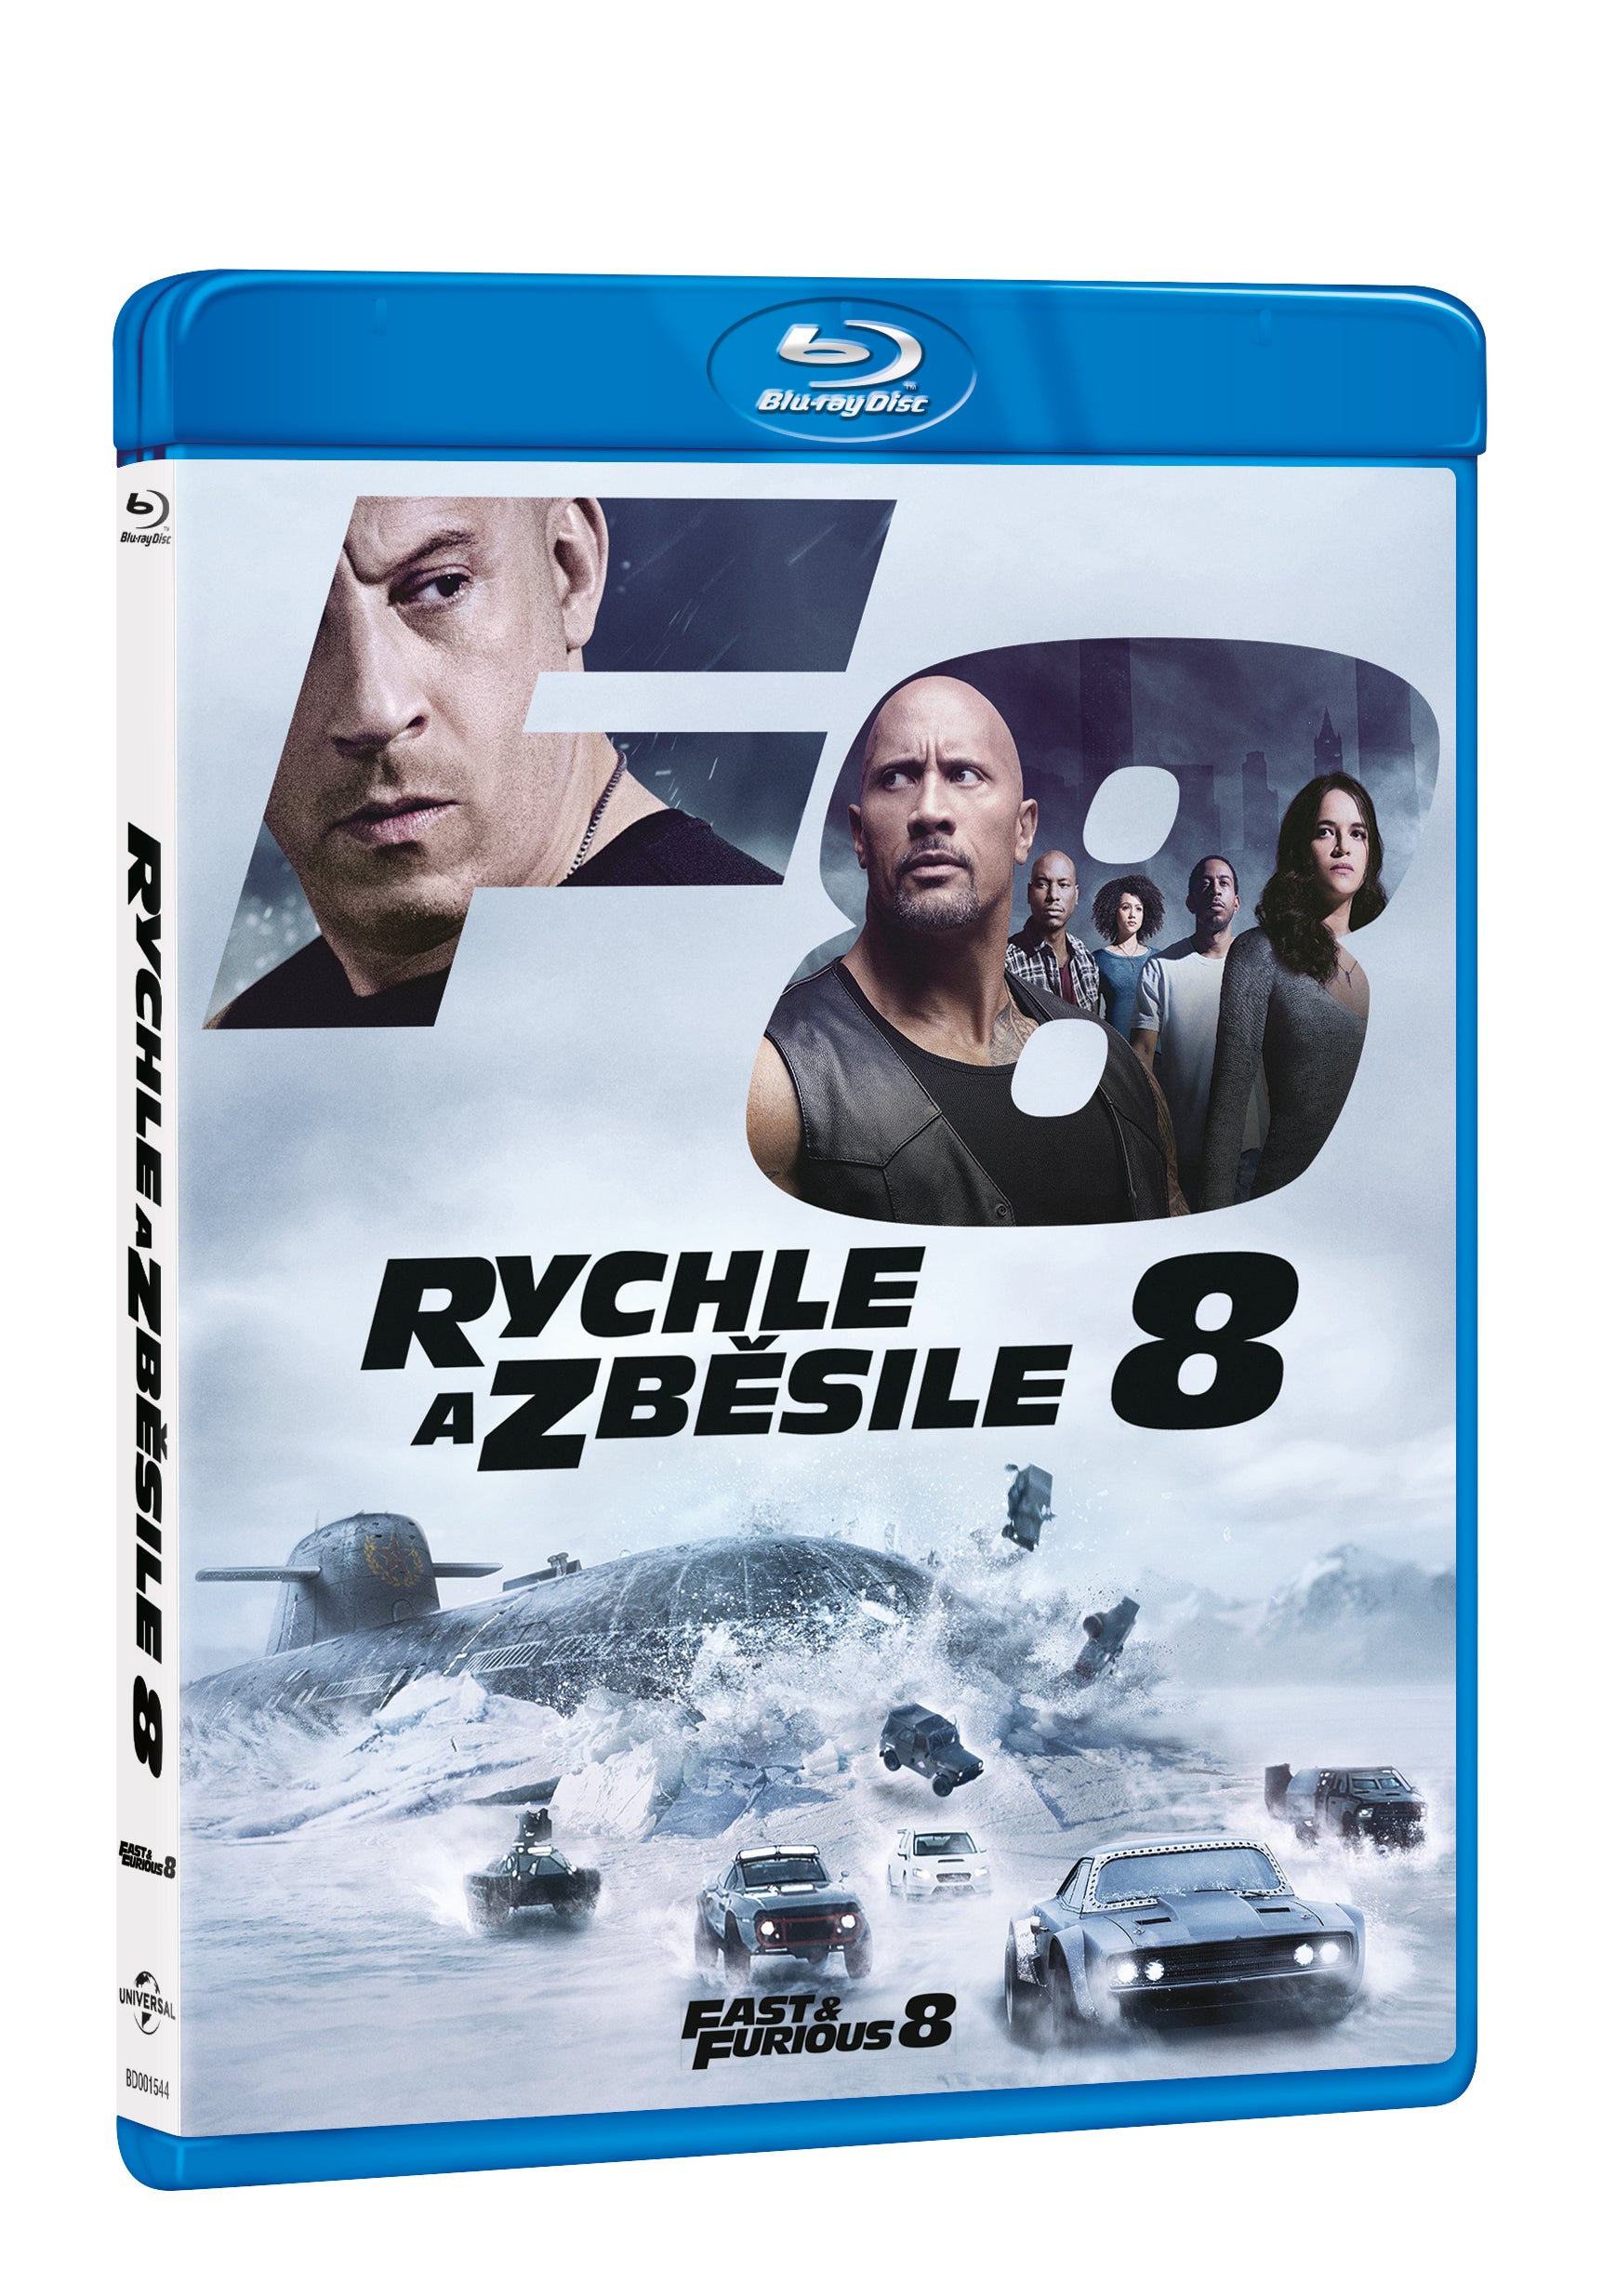 Rychle a zbesile 8 BD / The Fate of the Furious - Czech version